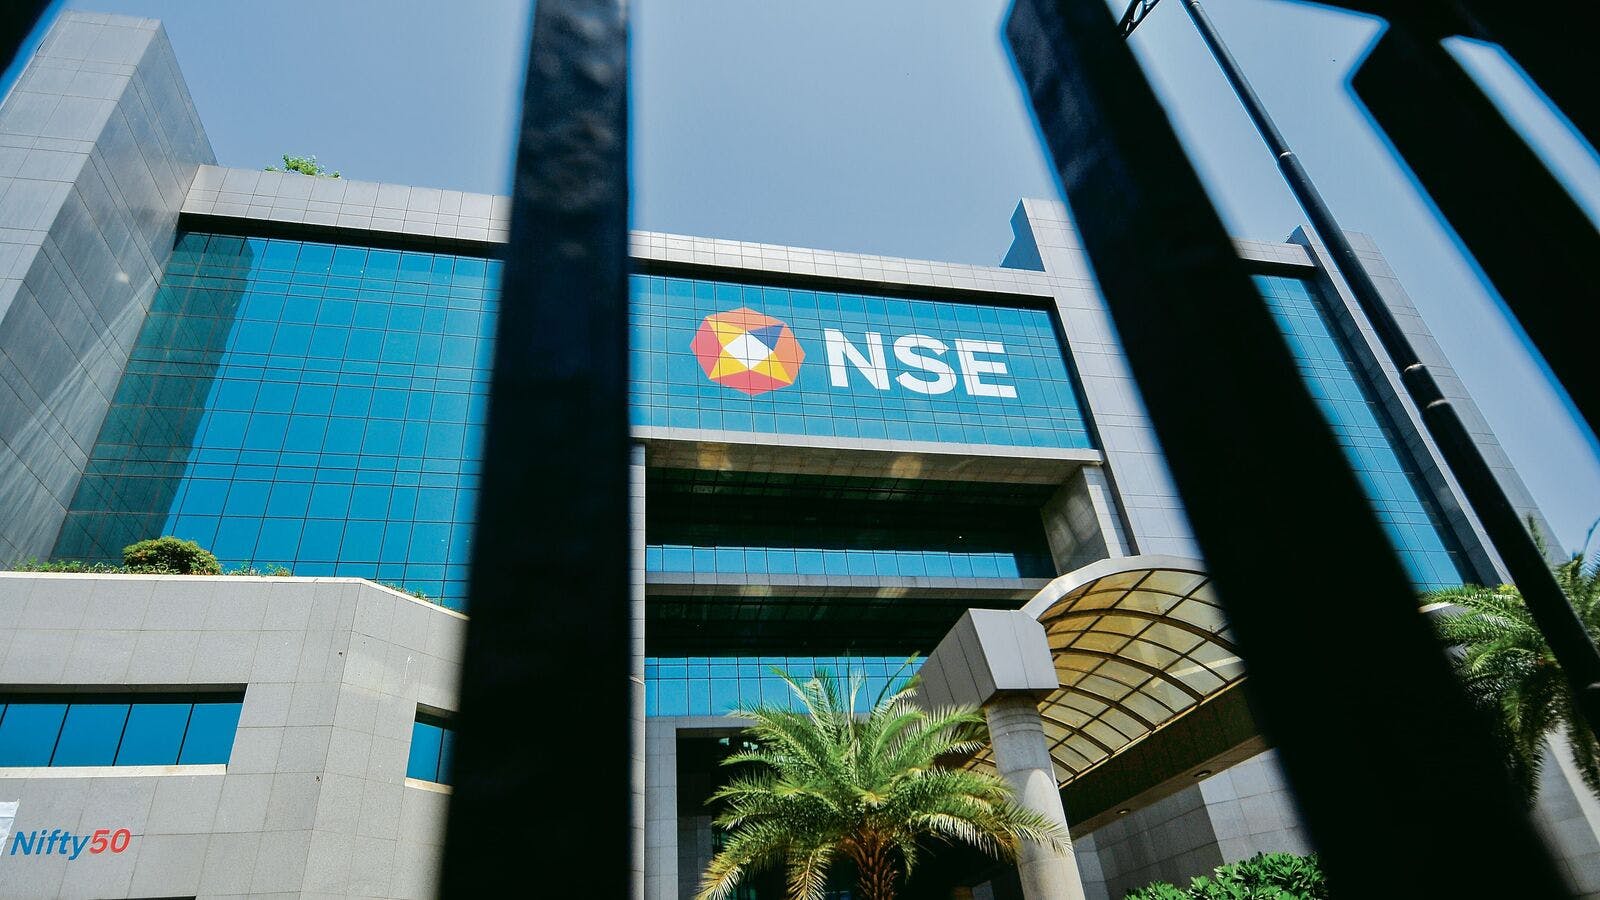 Punjab National Bank, SAIL, 9 others placed under F&amp;O ban list on NSE for August 21; check full list